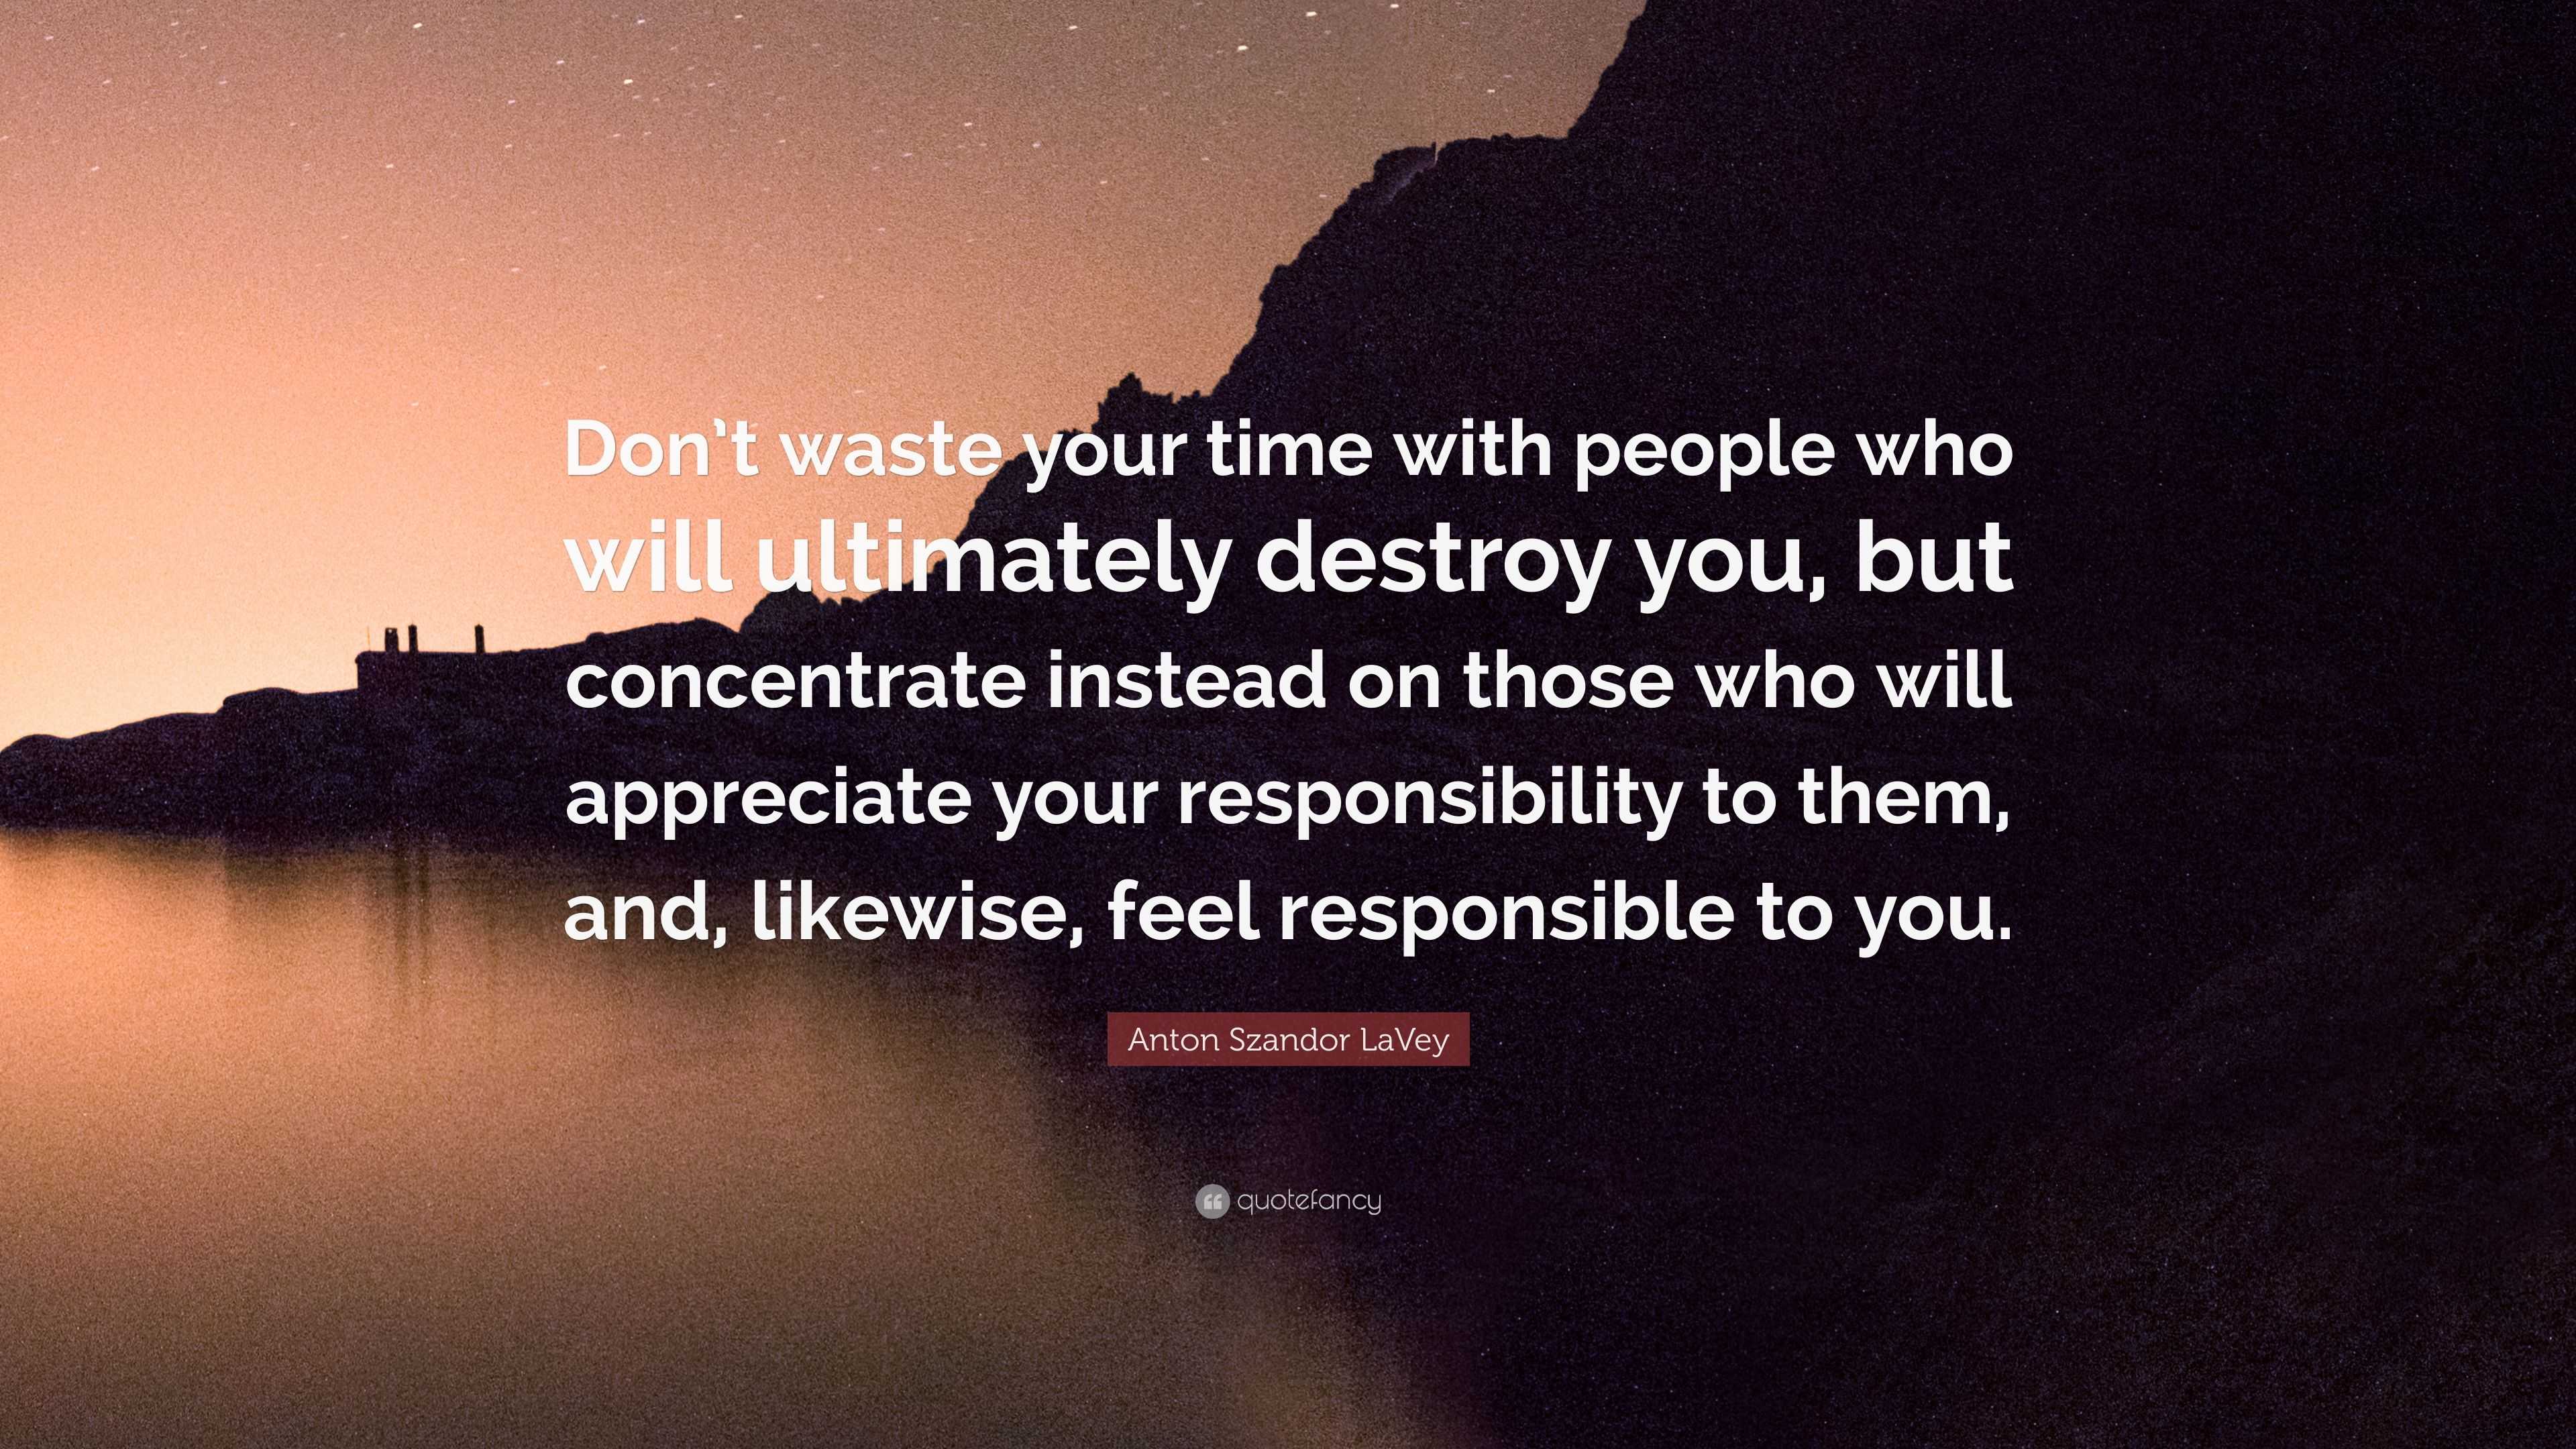 Anton Szandor LaVey Quote “Don t waste your time with people who will